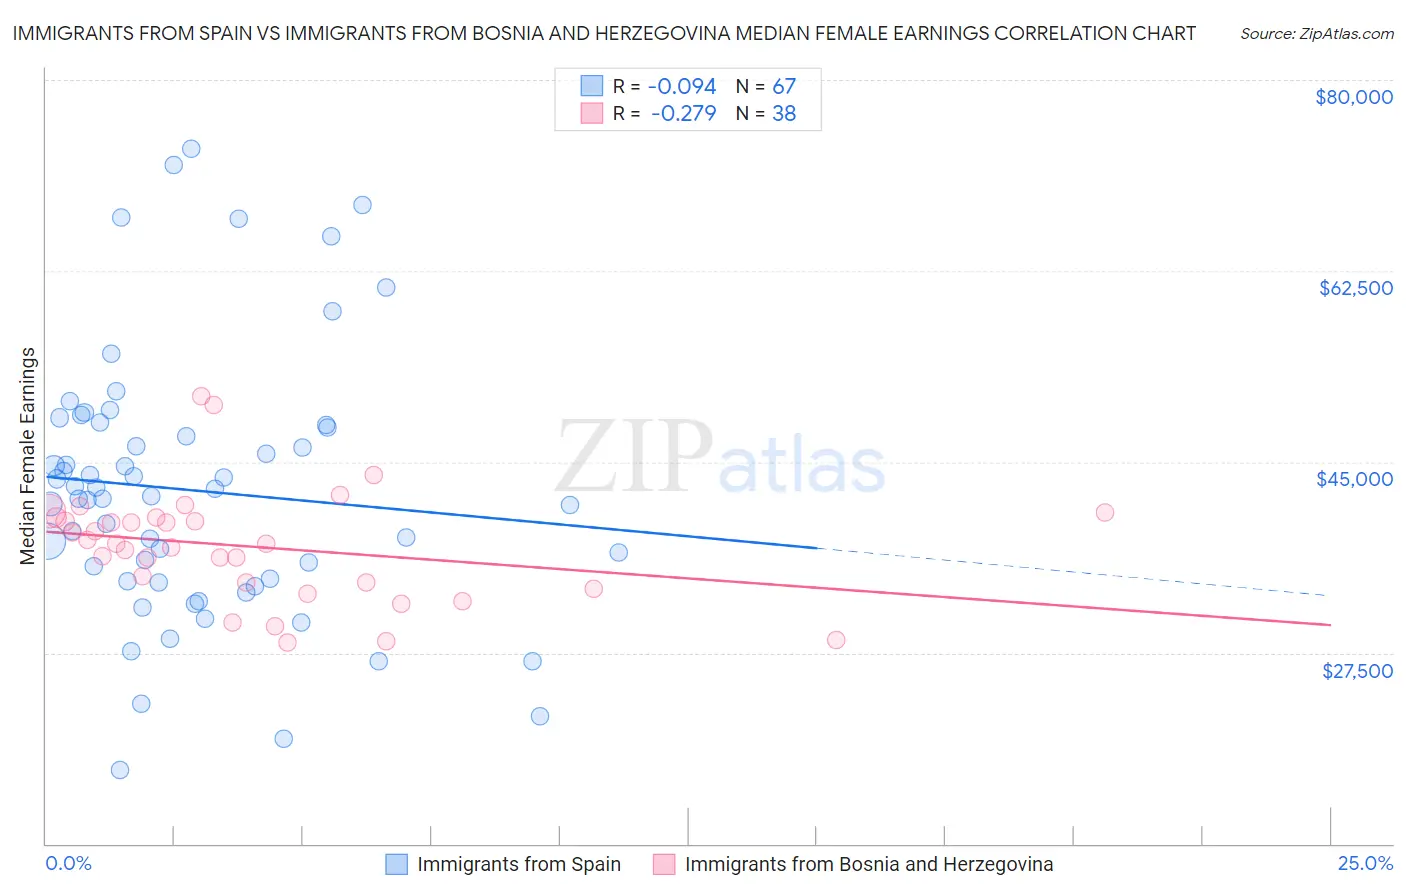 Immigrants from Spain vs Immigrants from Bosnia and Herzegovina Median Female Earnings